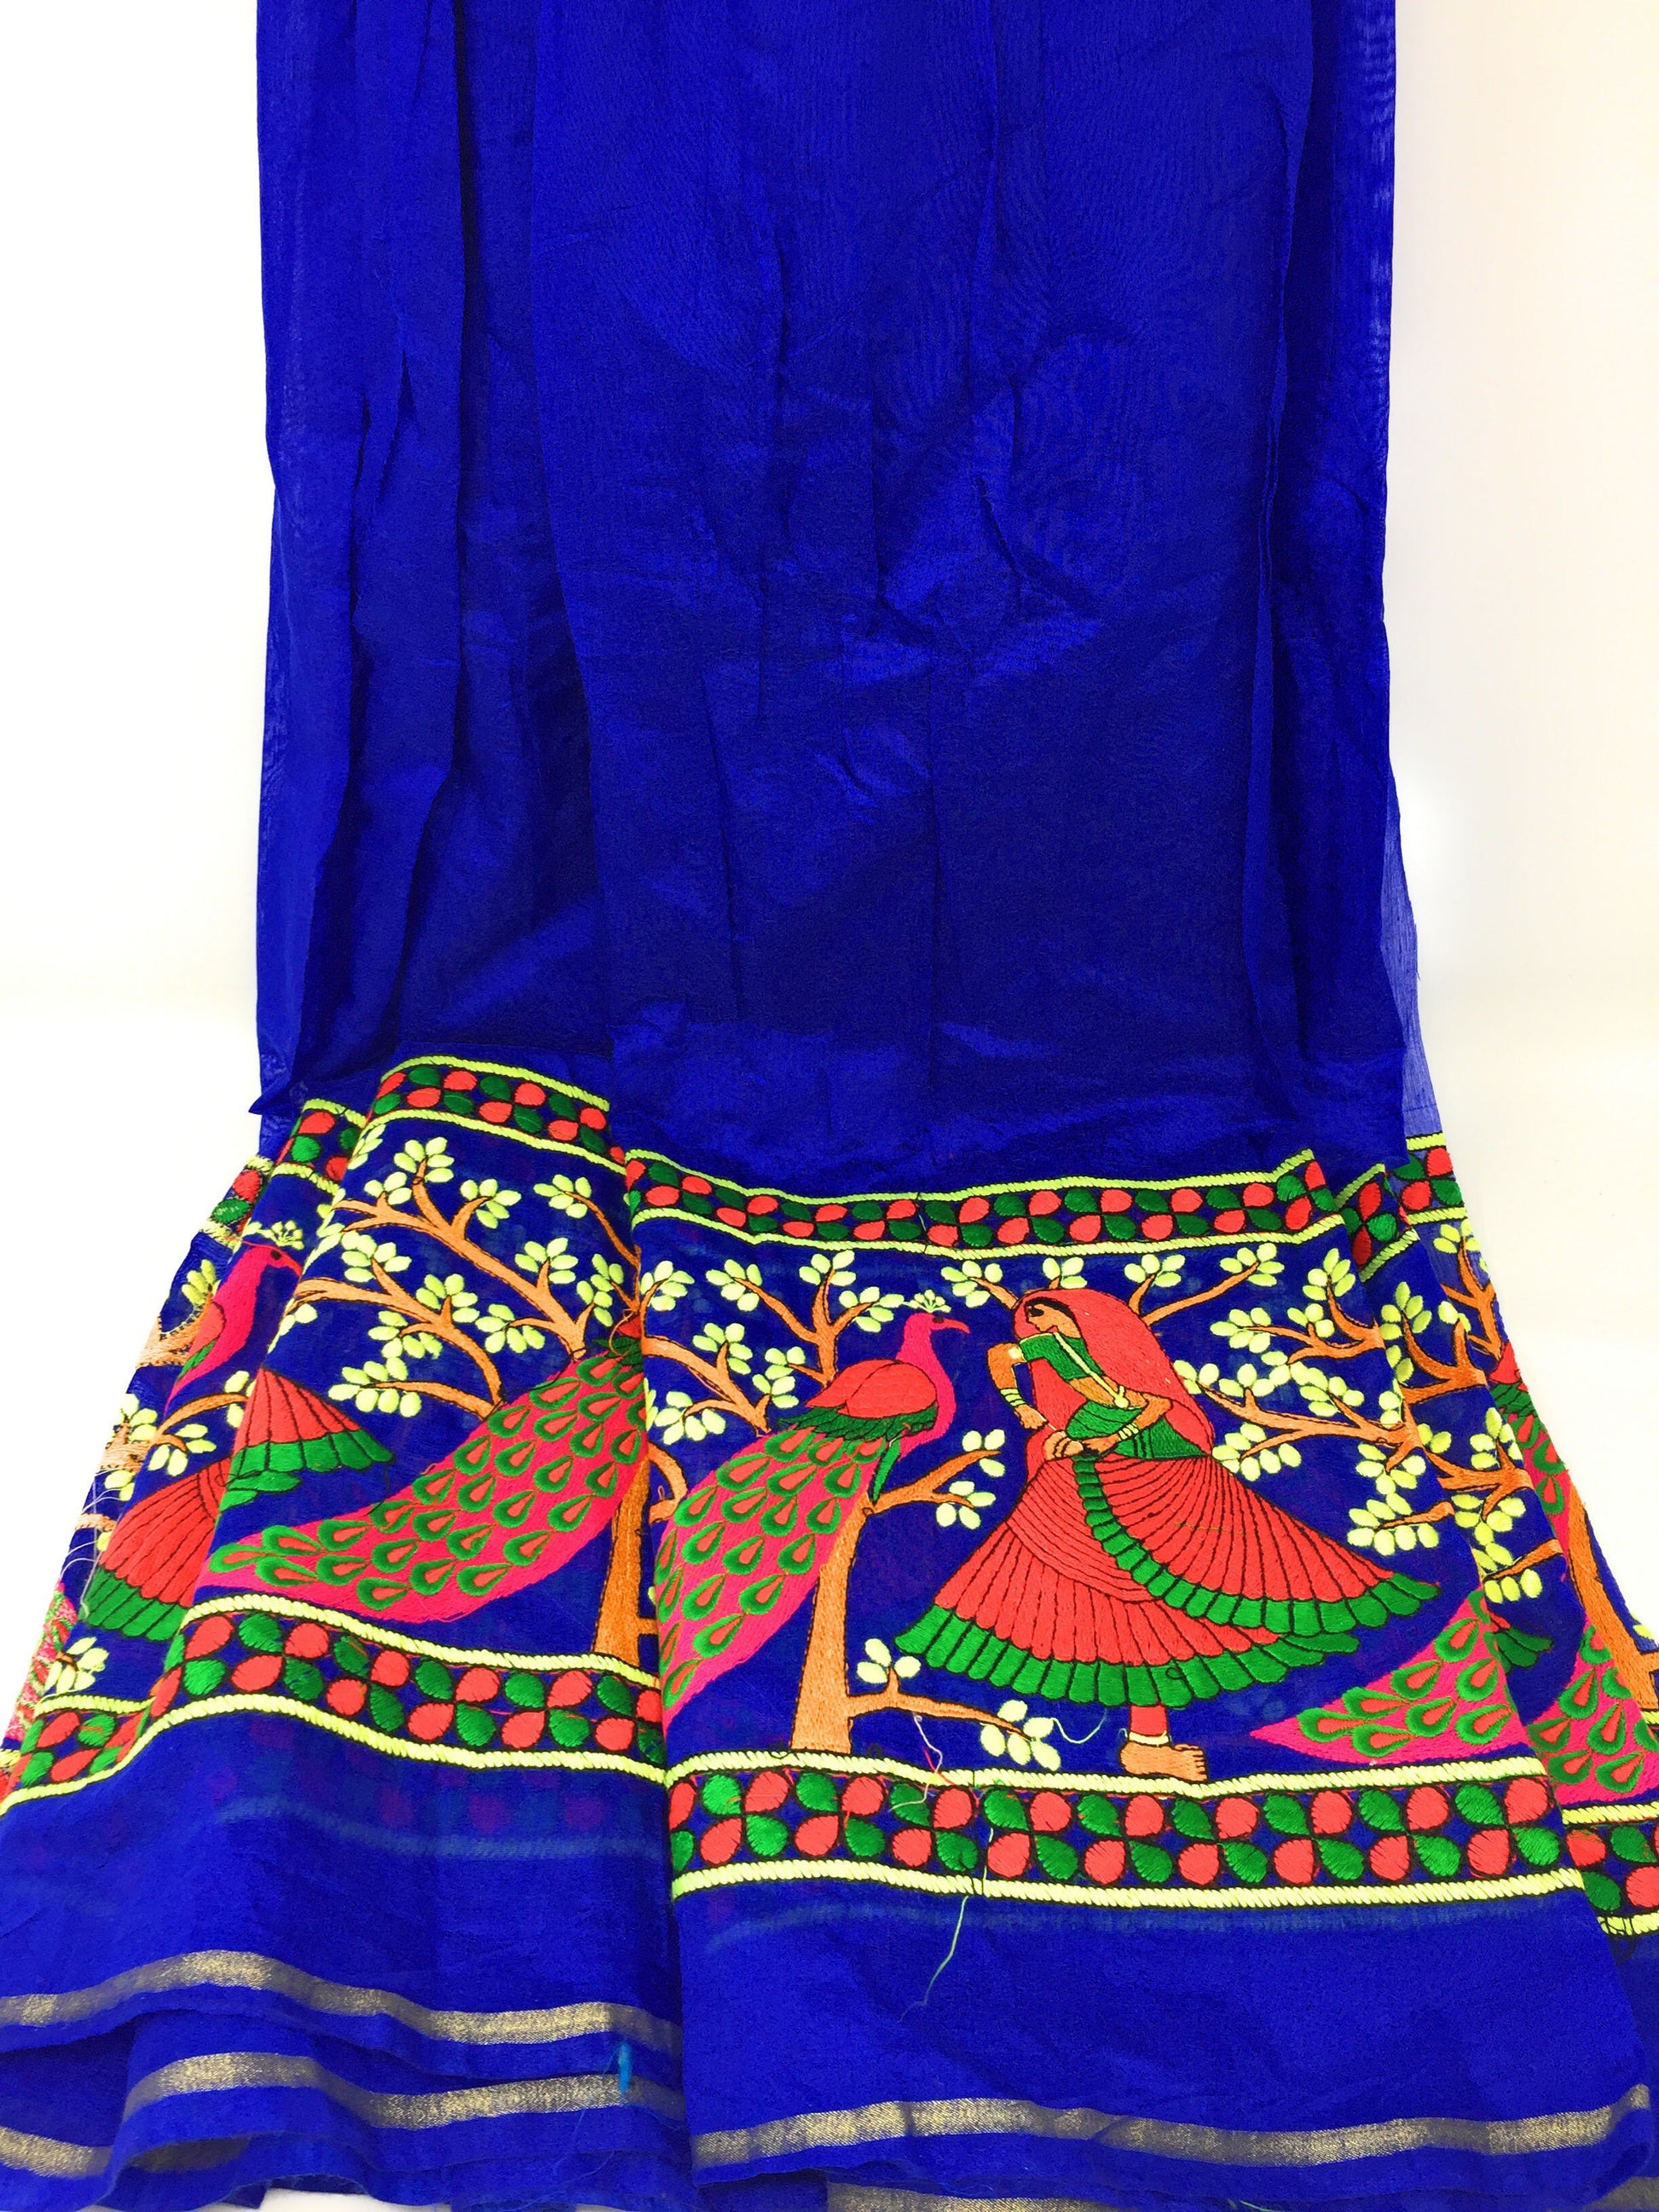 Chanderi  Cotton mix Royal Blue Embroidered Fabric Material 